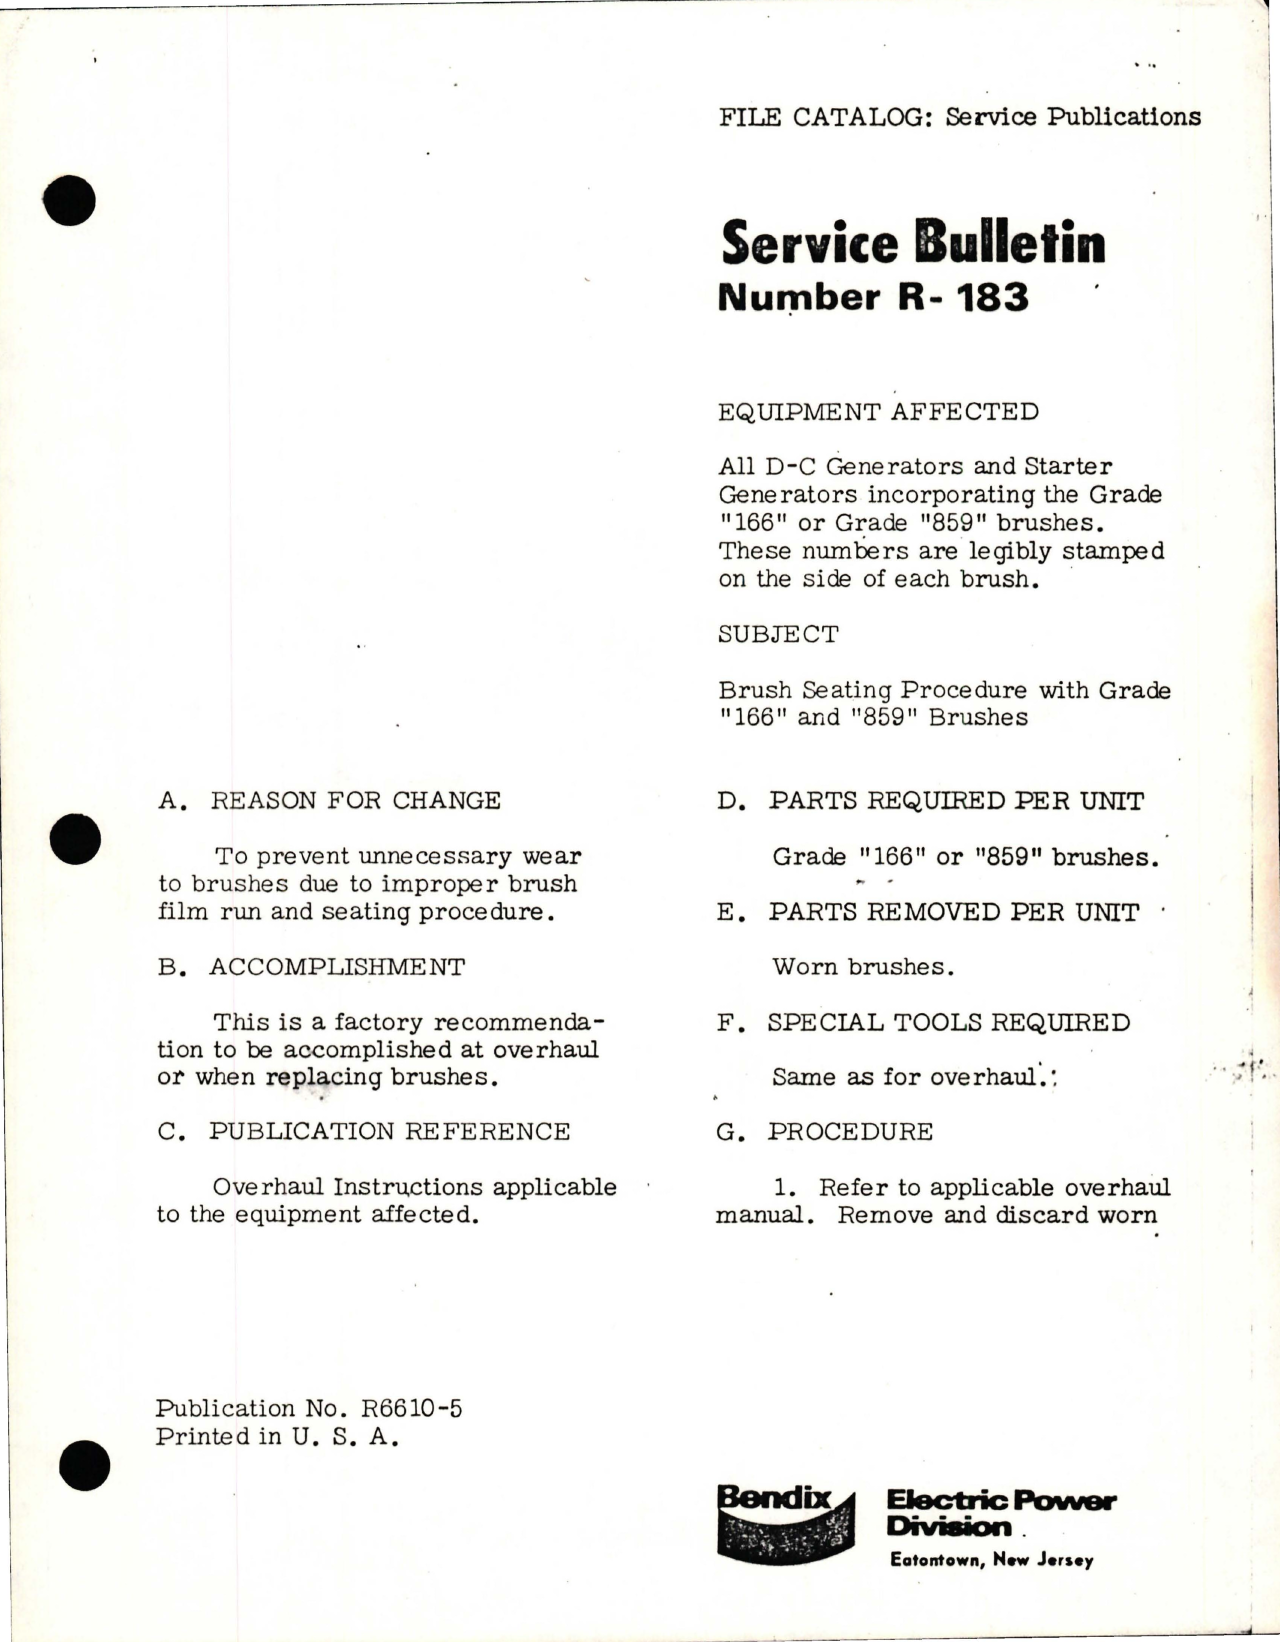 Sample page 1 from AirCorps Library document: Brush Seating Procedure with Grade 166 and 859 Brushes for D-C Generators and Starter Generators